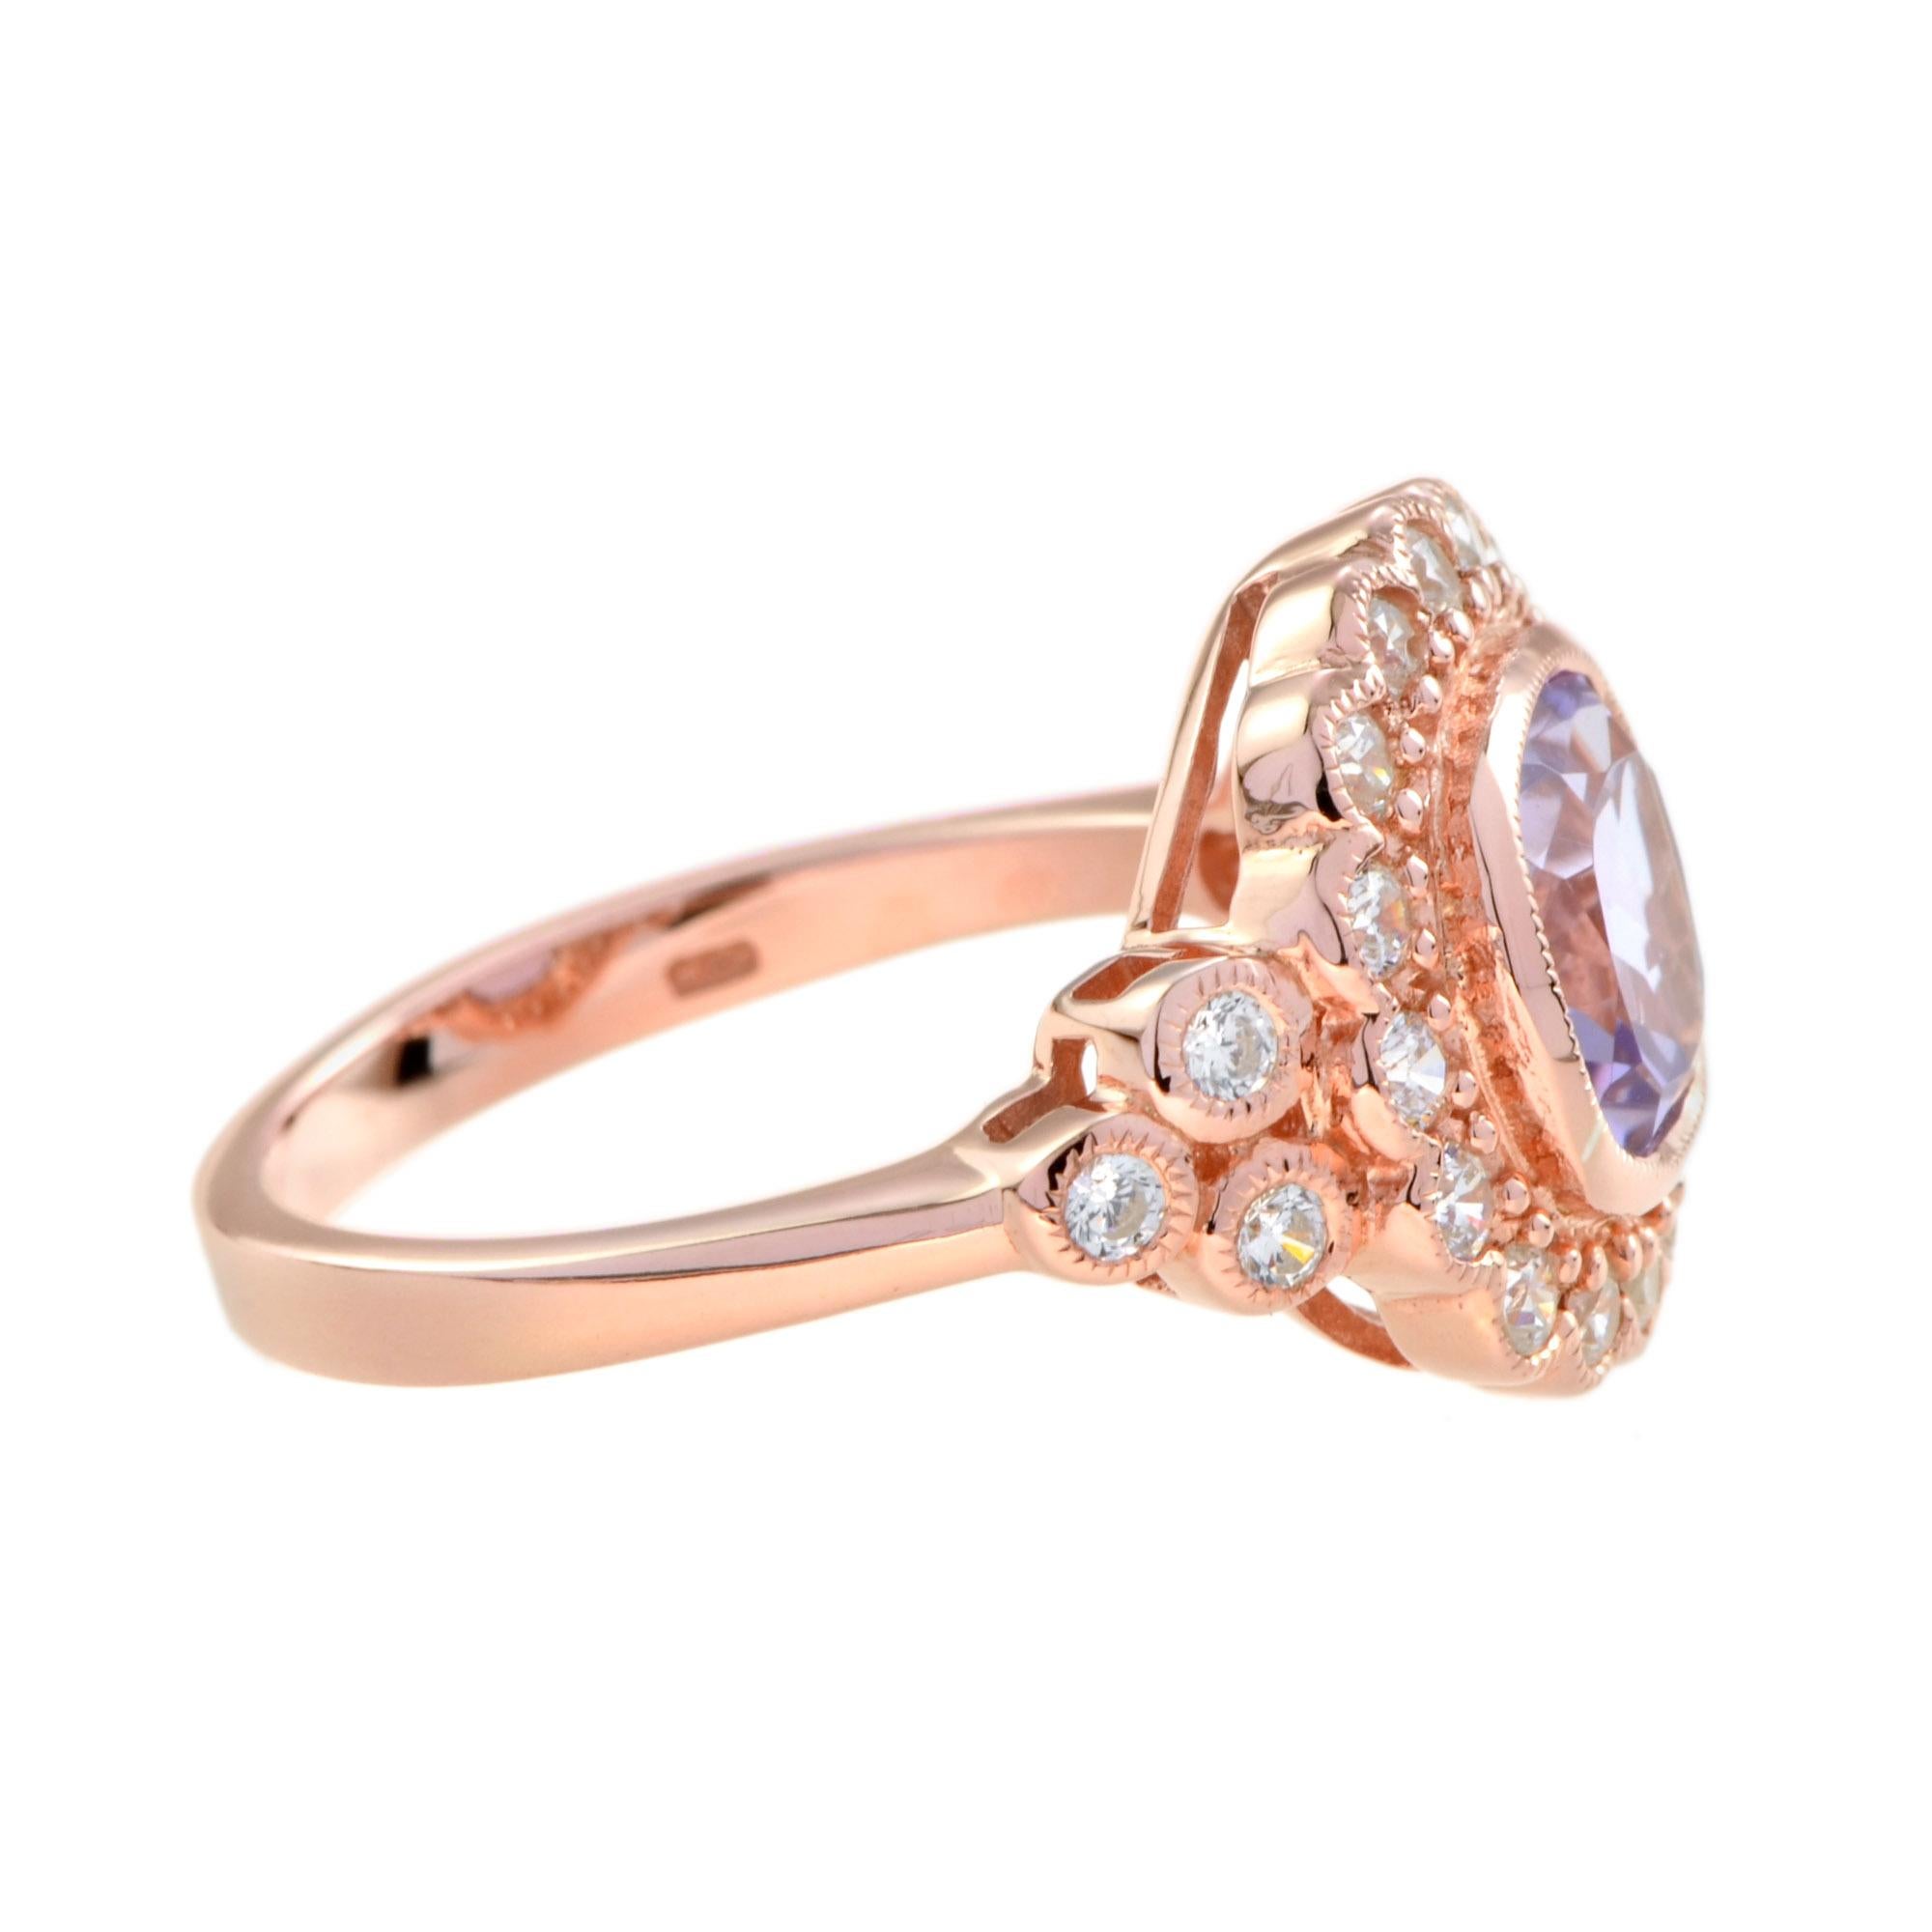 For Sale:  Pink Amethyst and Diamond Antique Style Halo Engagement Ring in 14k Rose Gold 3